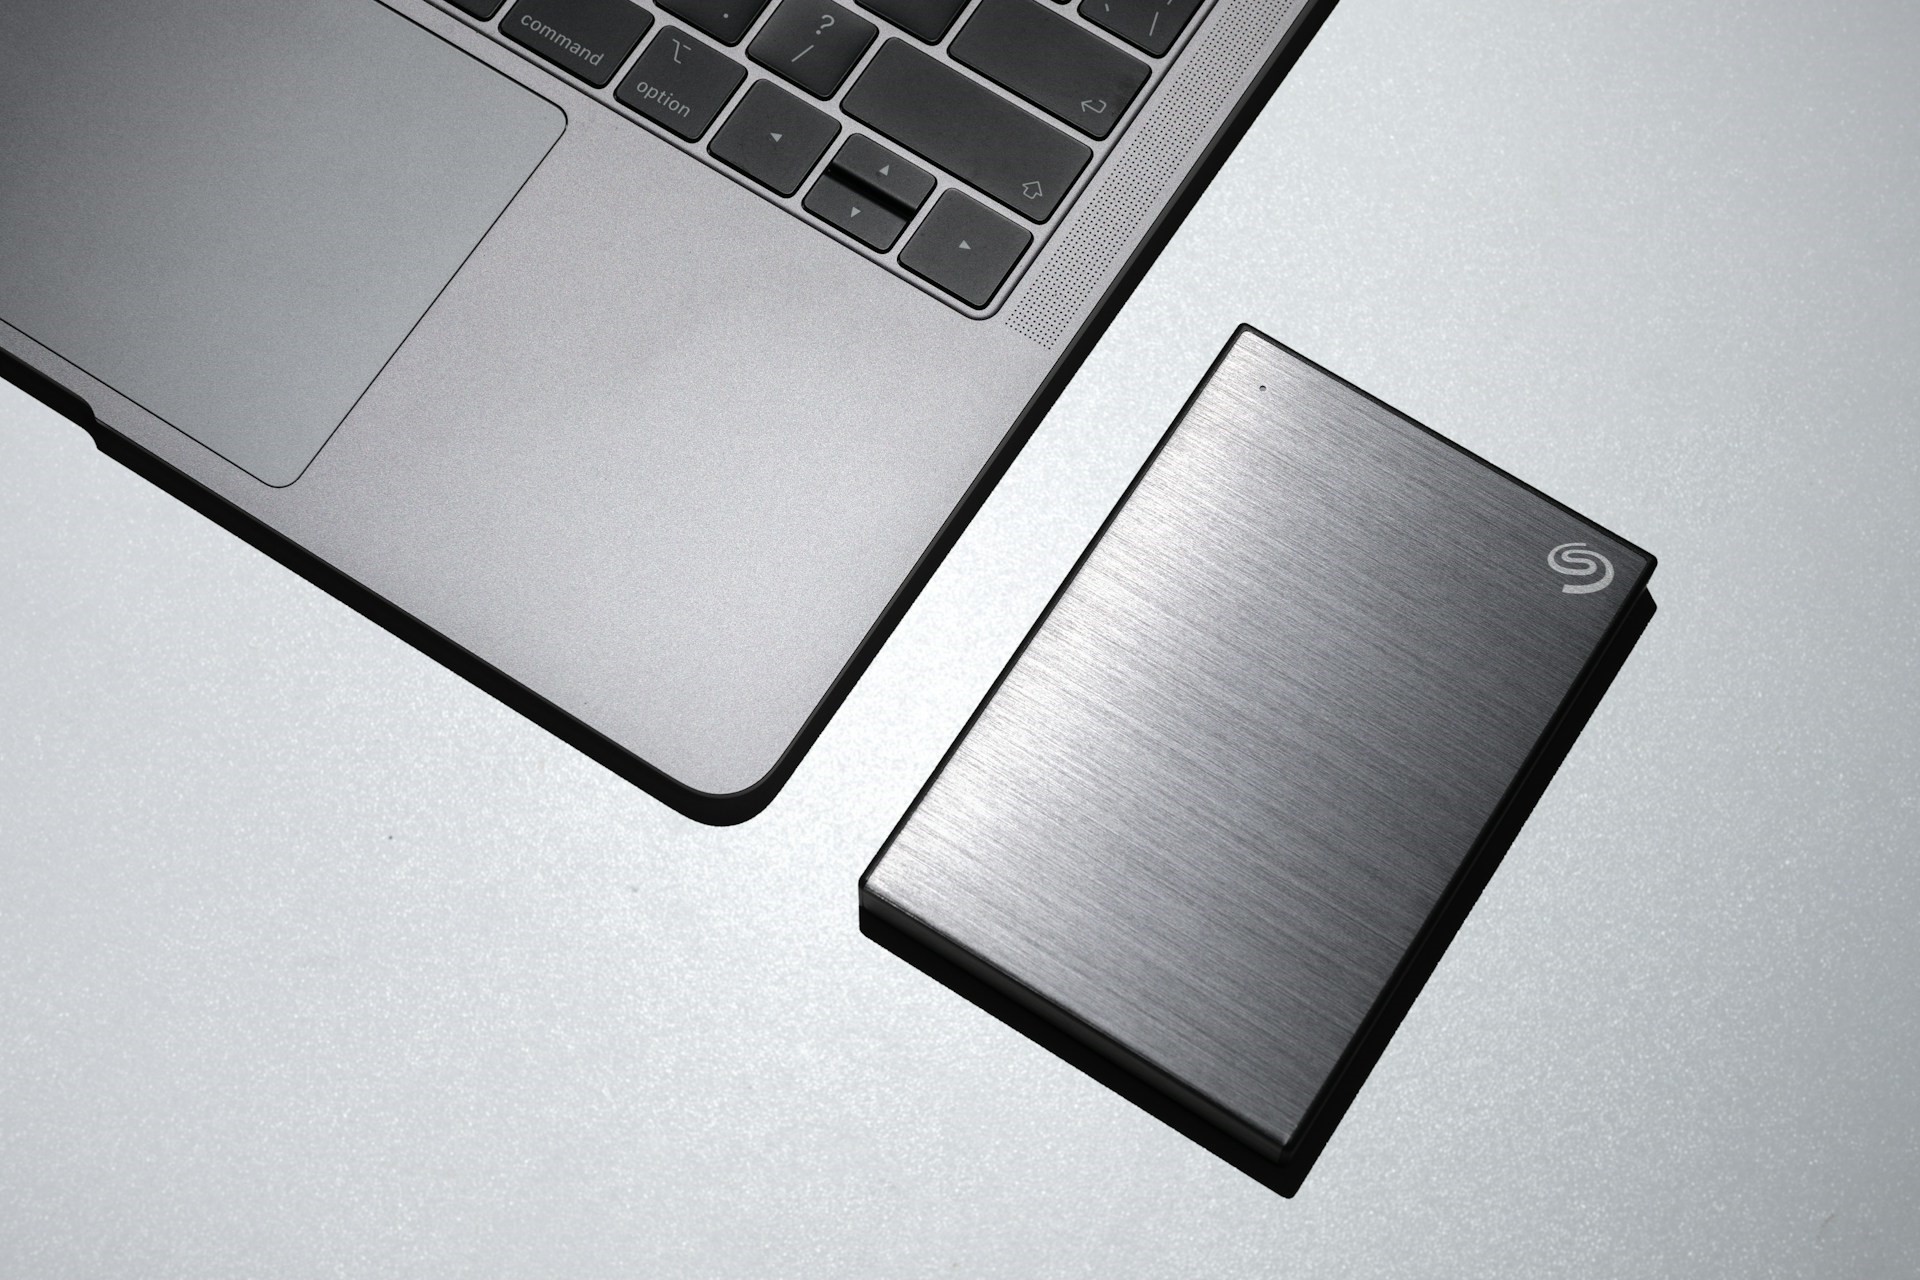 WDC and Seagate to increase price of SSD and HDD